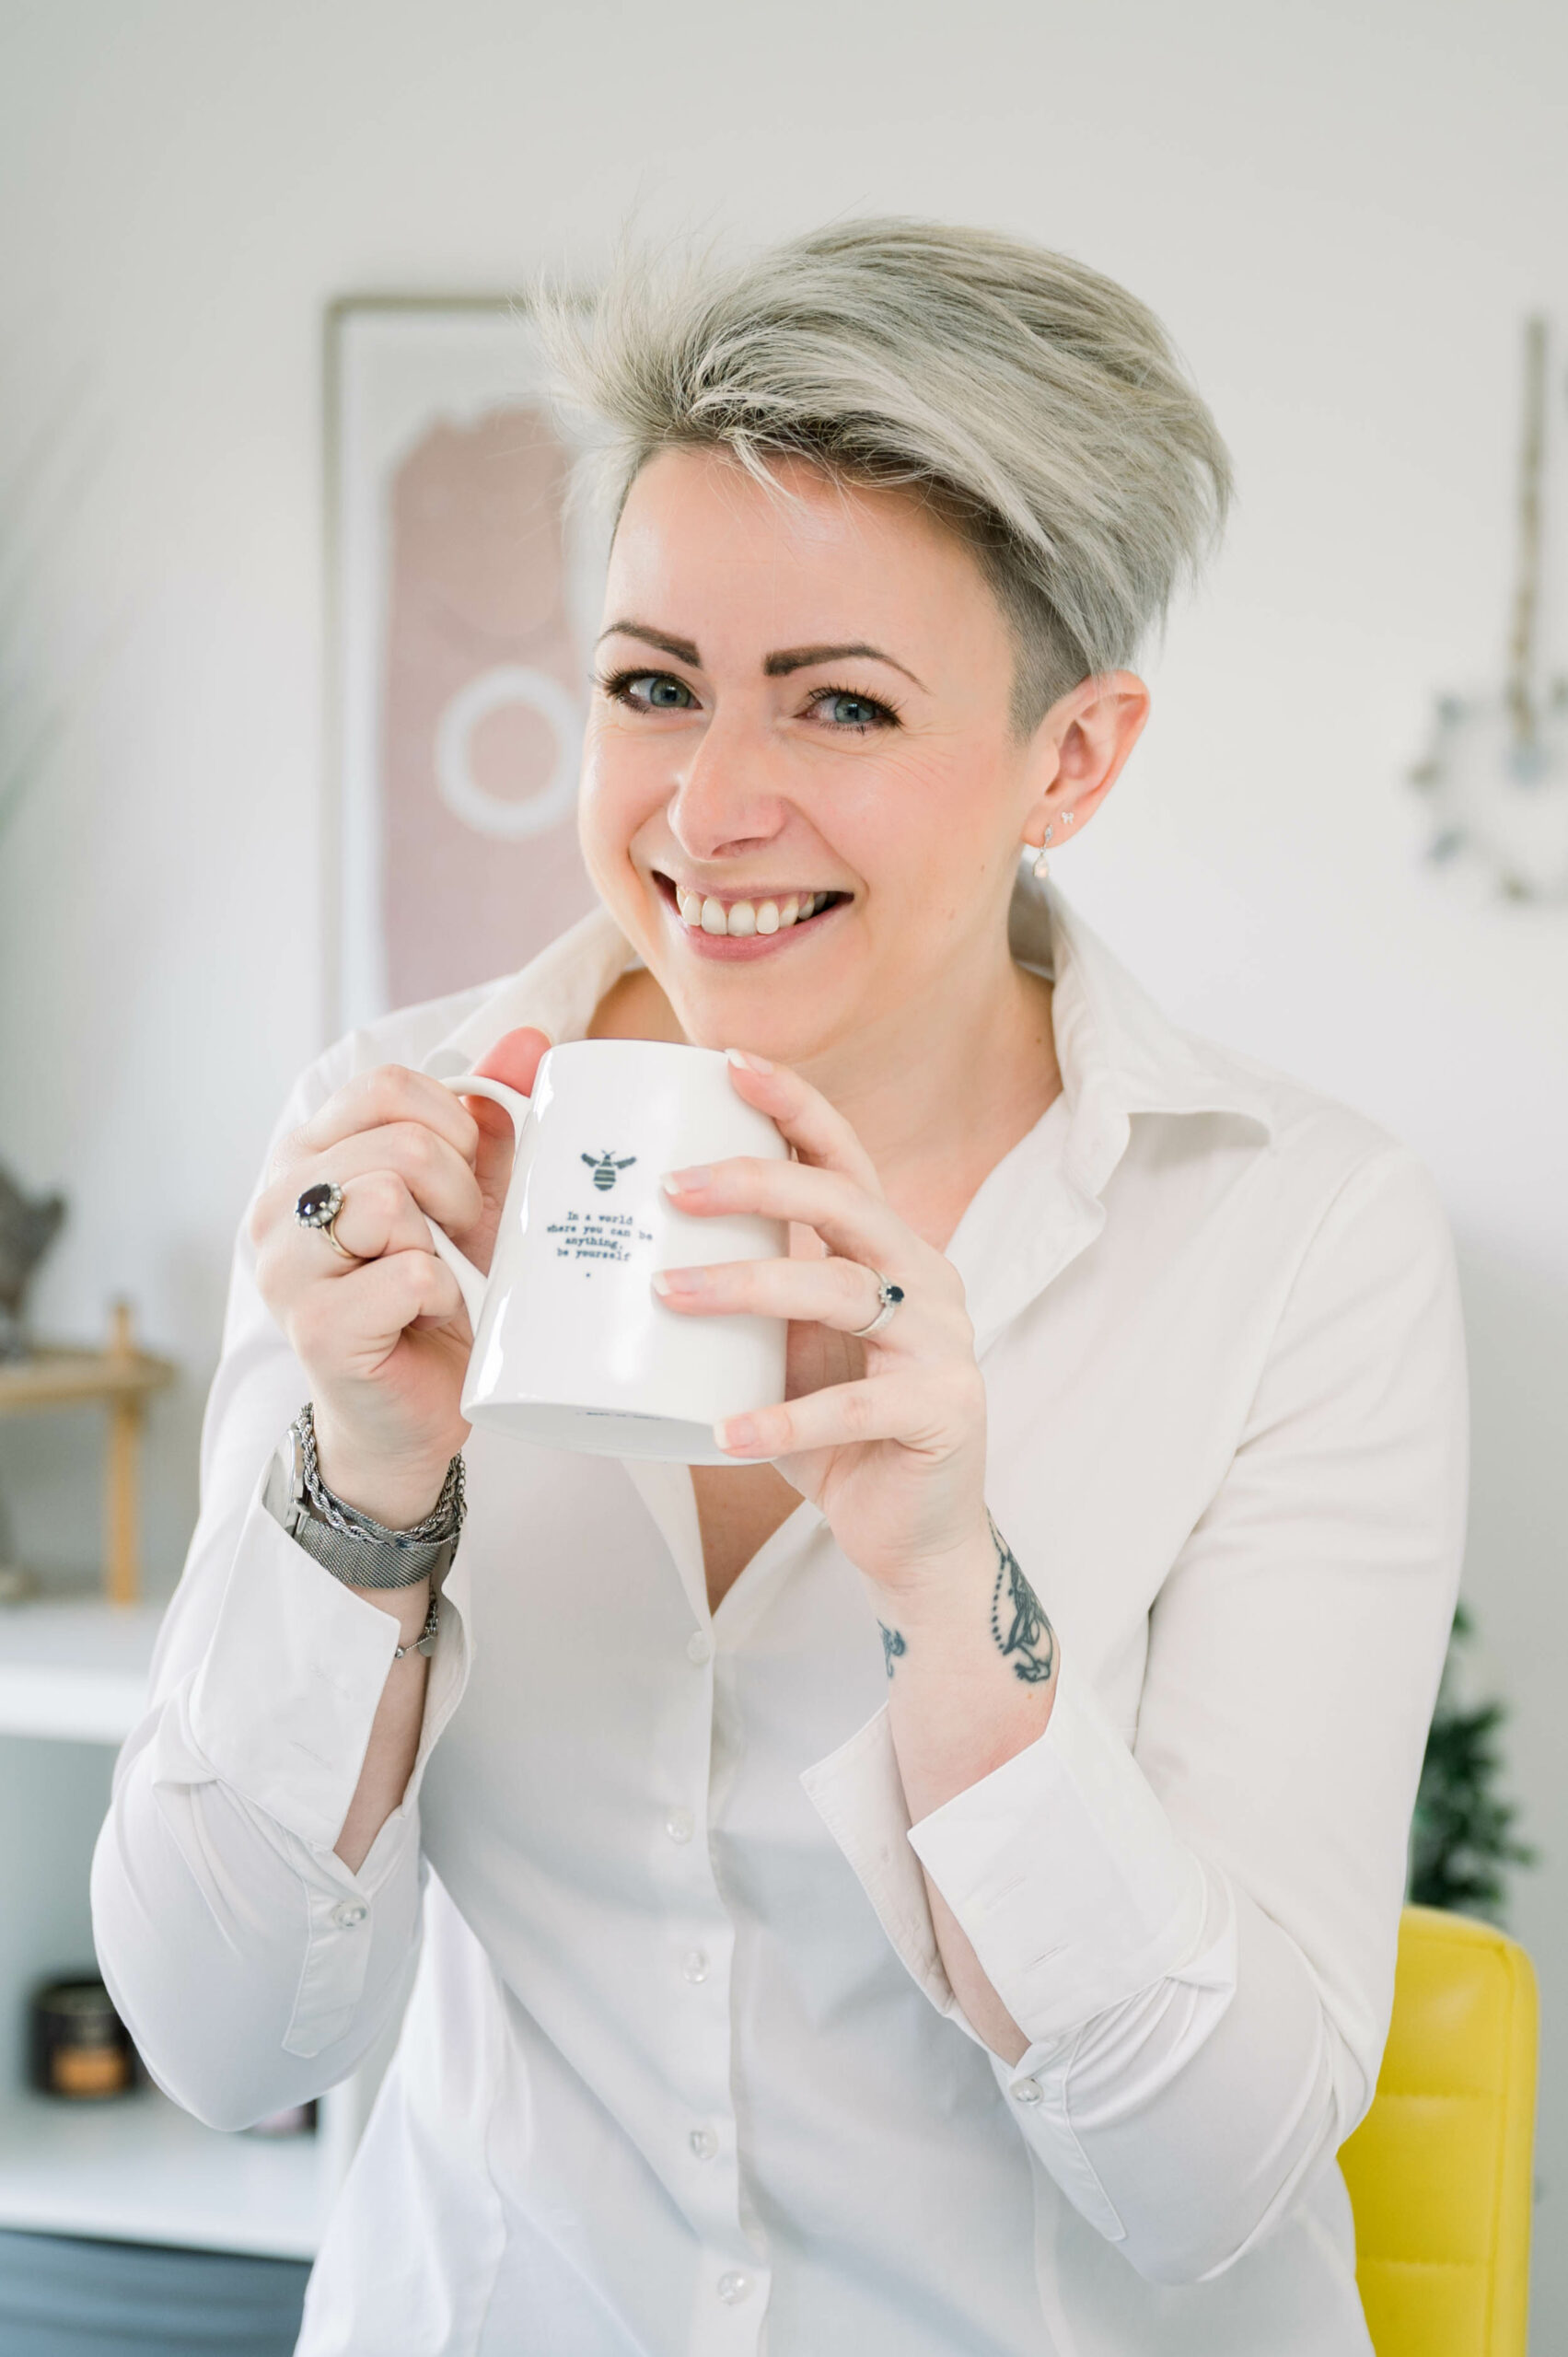 Blonde haired lady smiling to camera with a mug in her hand